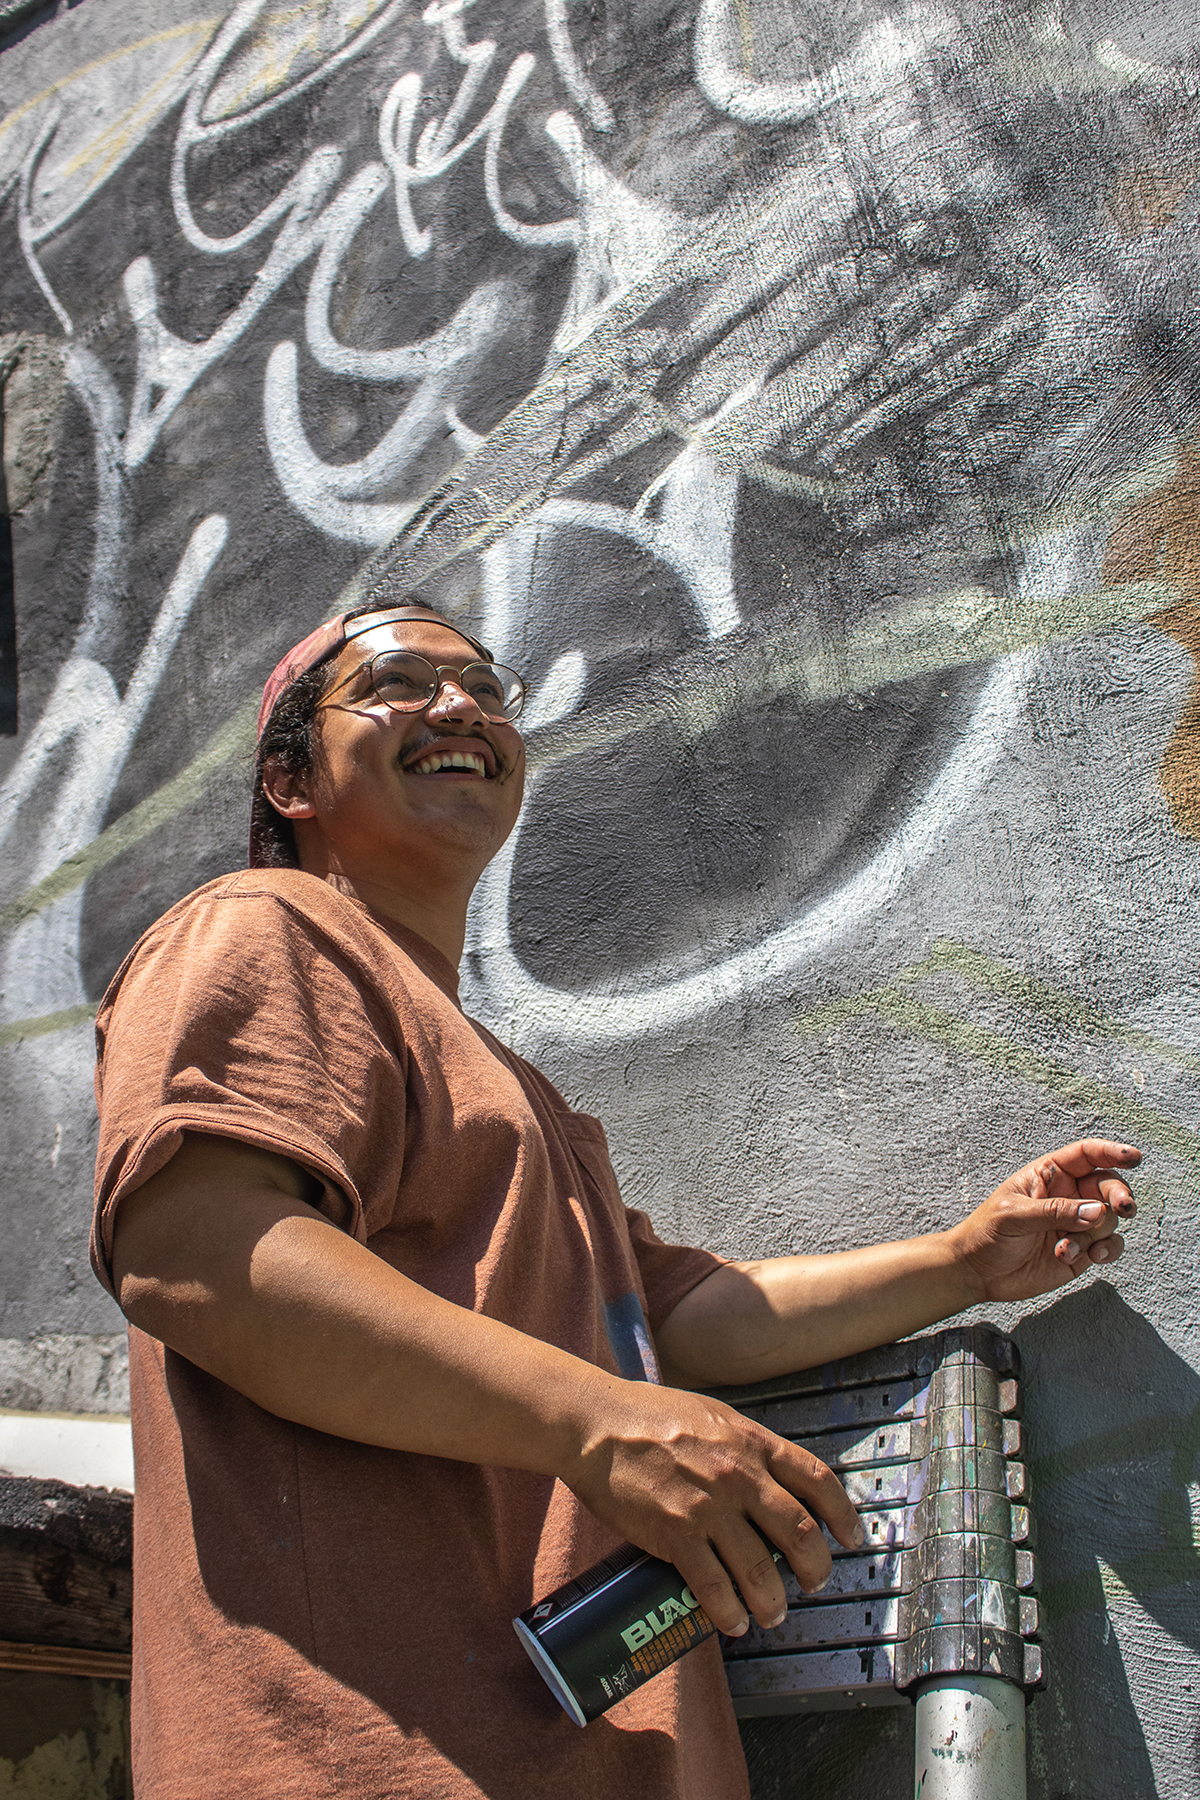 Photograph of artist Luvs, he is looking upwards and smiling, wearing a brown shirt. He is in front of a wall that is grey and has some black and white graffiti art.